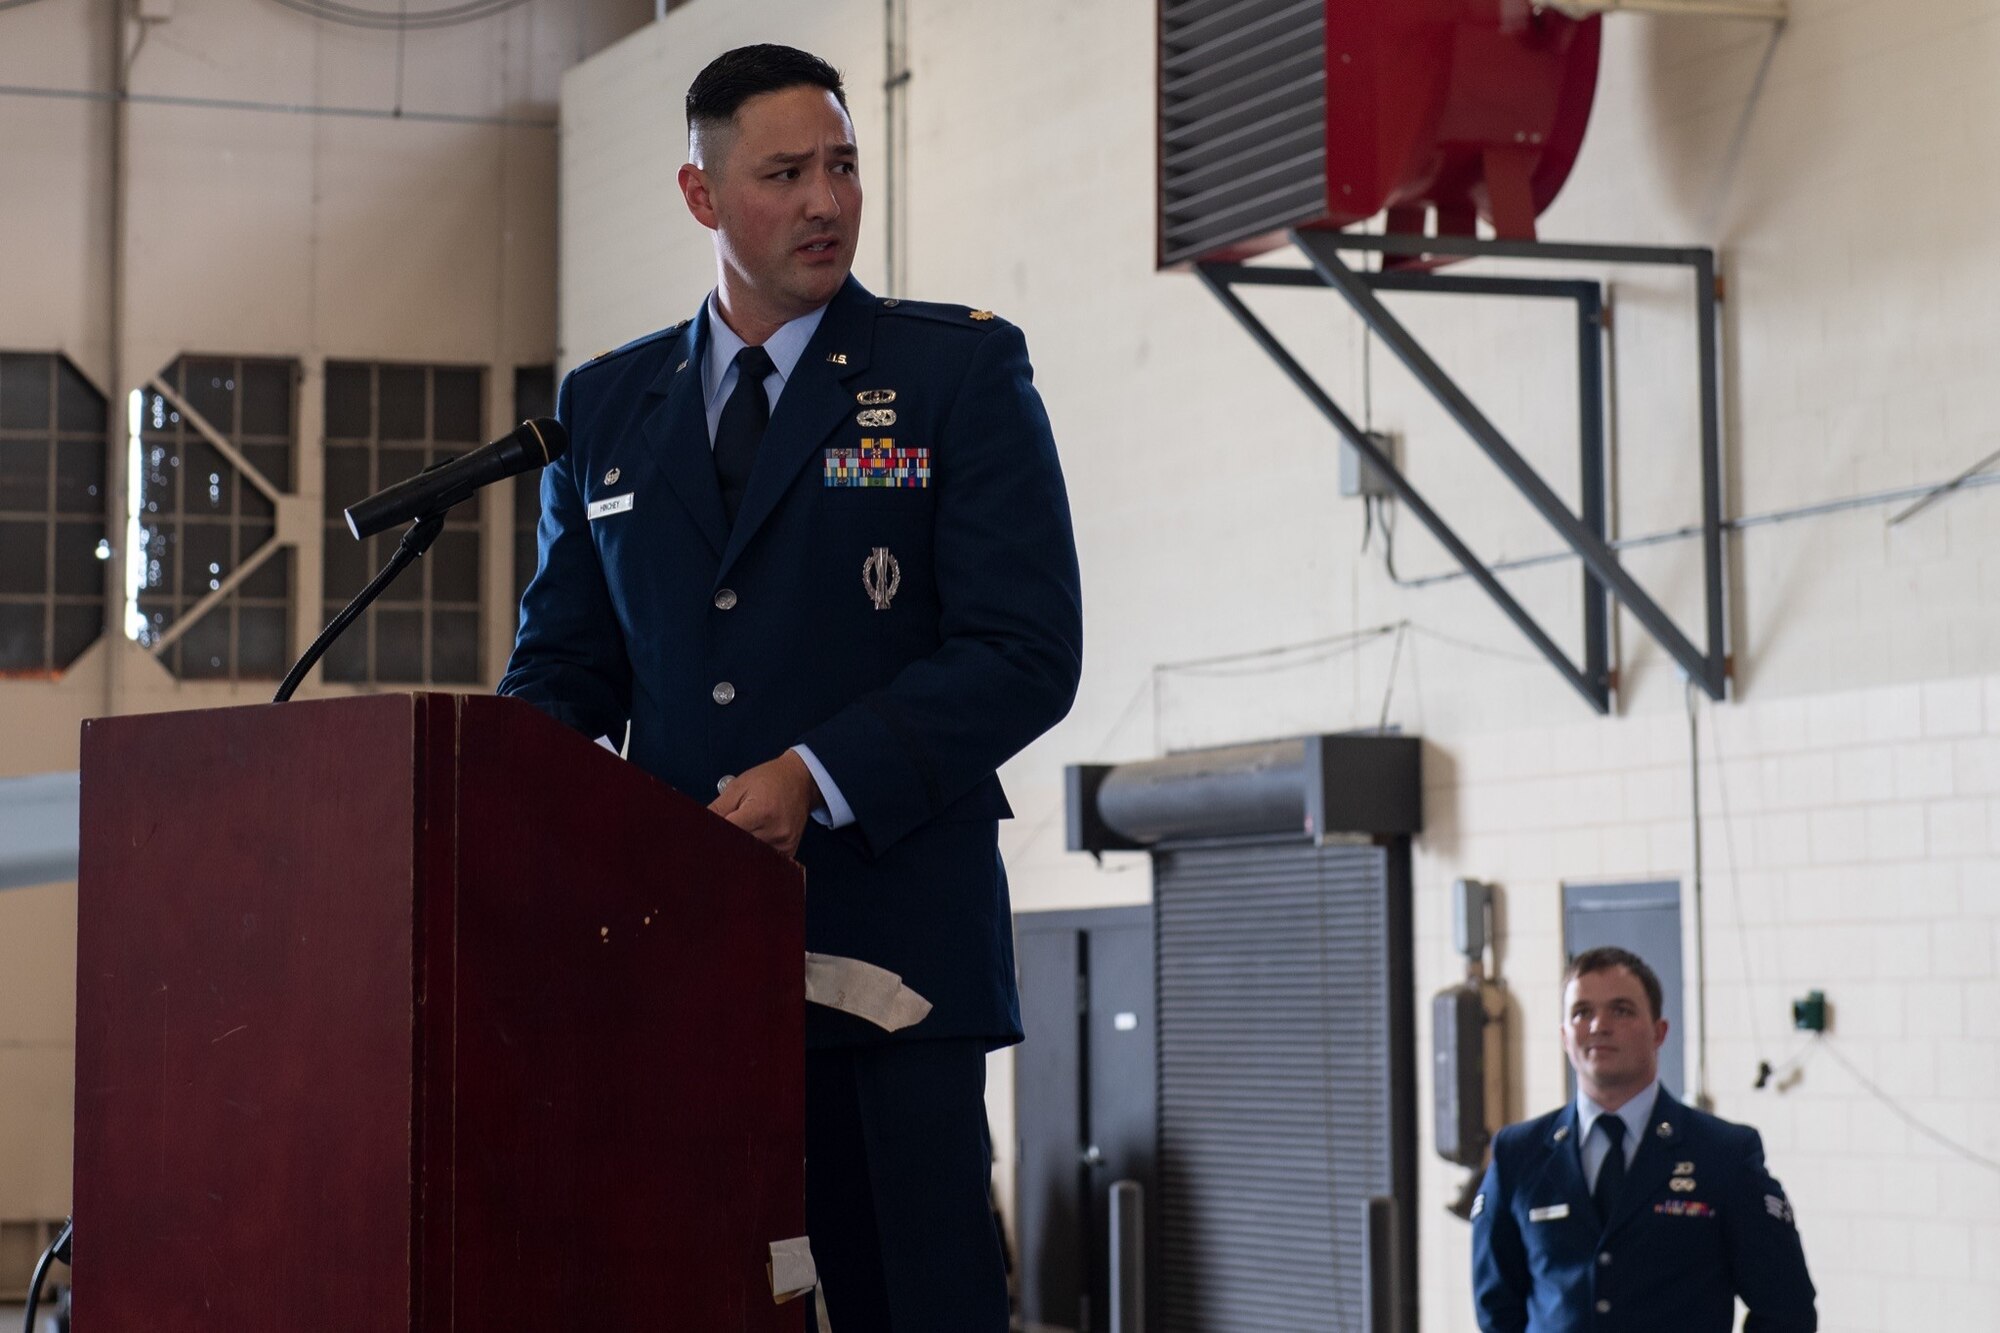 U.S. Air Force Maj. William Hichney, 23d Munitions Squadron commander, delivers a speech during the assumption of command ceremony for the newly reactivated squadron, July 1, 2021, at Moody Air Force Base, Georgia. The 23d MUNS will be directly assisting with the management of a $58 million munitions mission set for the 23d Wing. (U.S. Air Force photo by Senior Airman John Crampton)